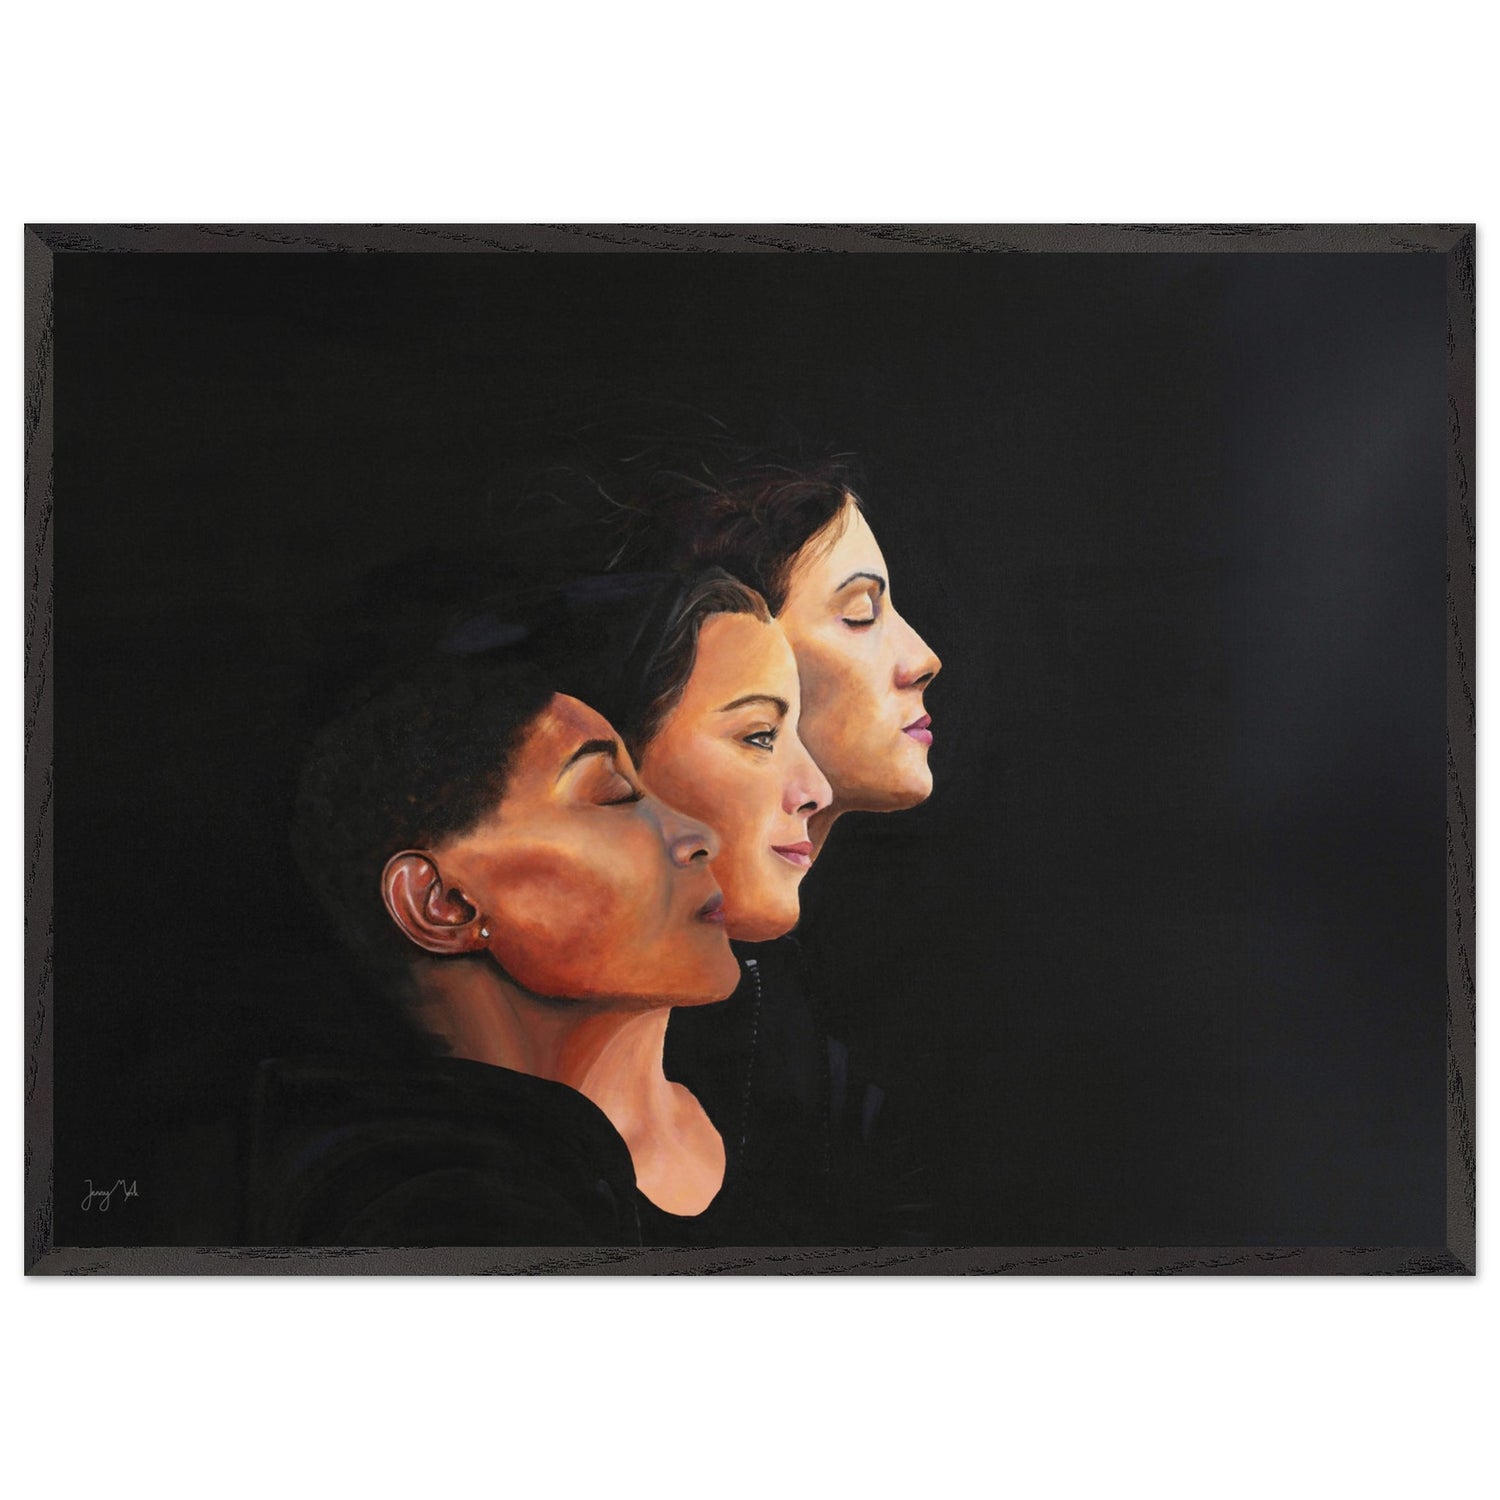 Painting titled "Sisterhood" displaying three faces next to each other surrounded by a dark background facing the light.